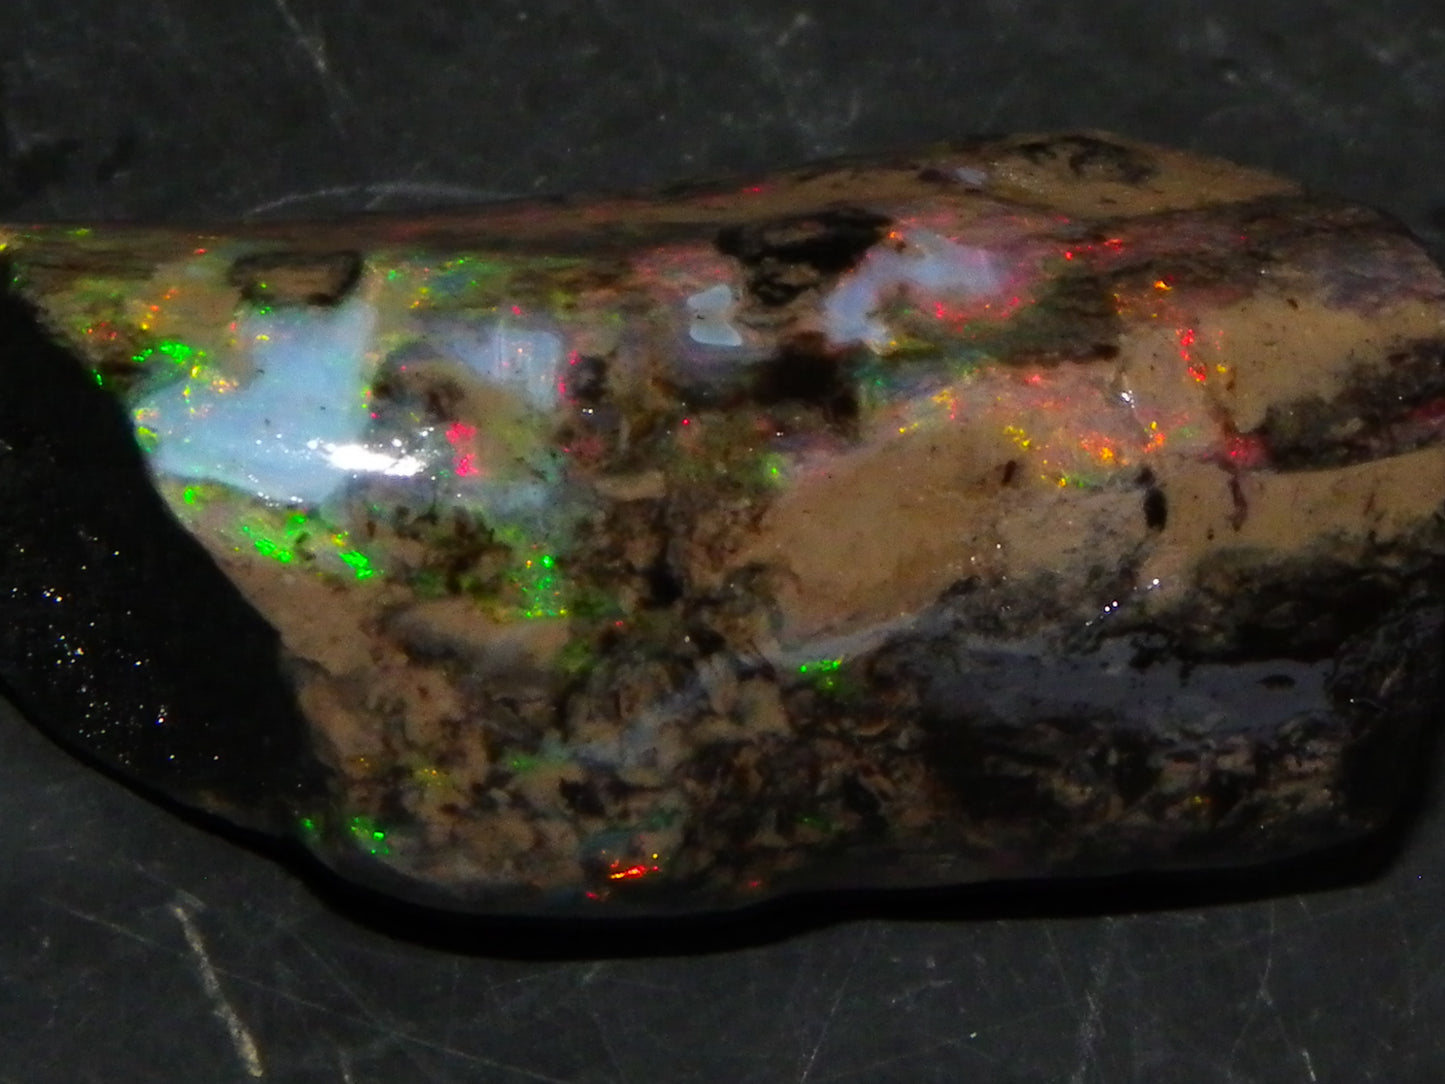 2 Nice Quality Indonesian Fossil Opal Specimens 41.3cts Bright Fires Green/Reds